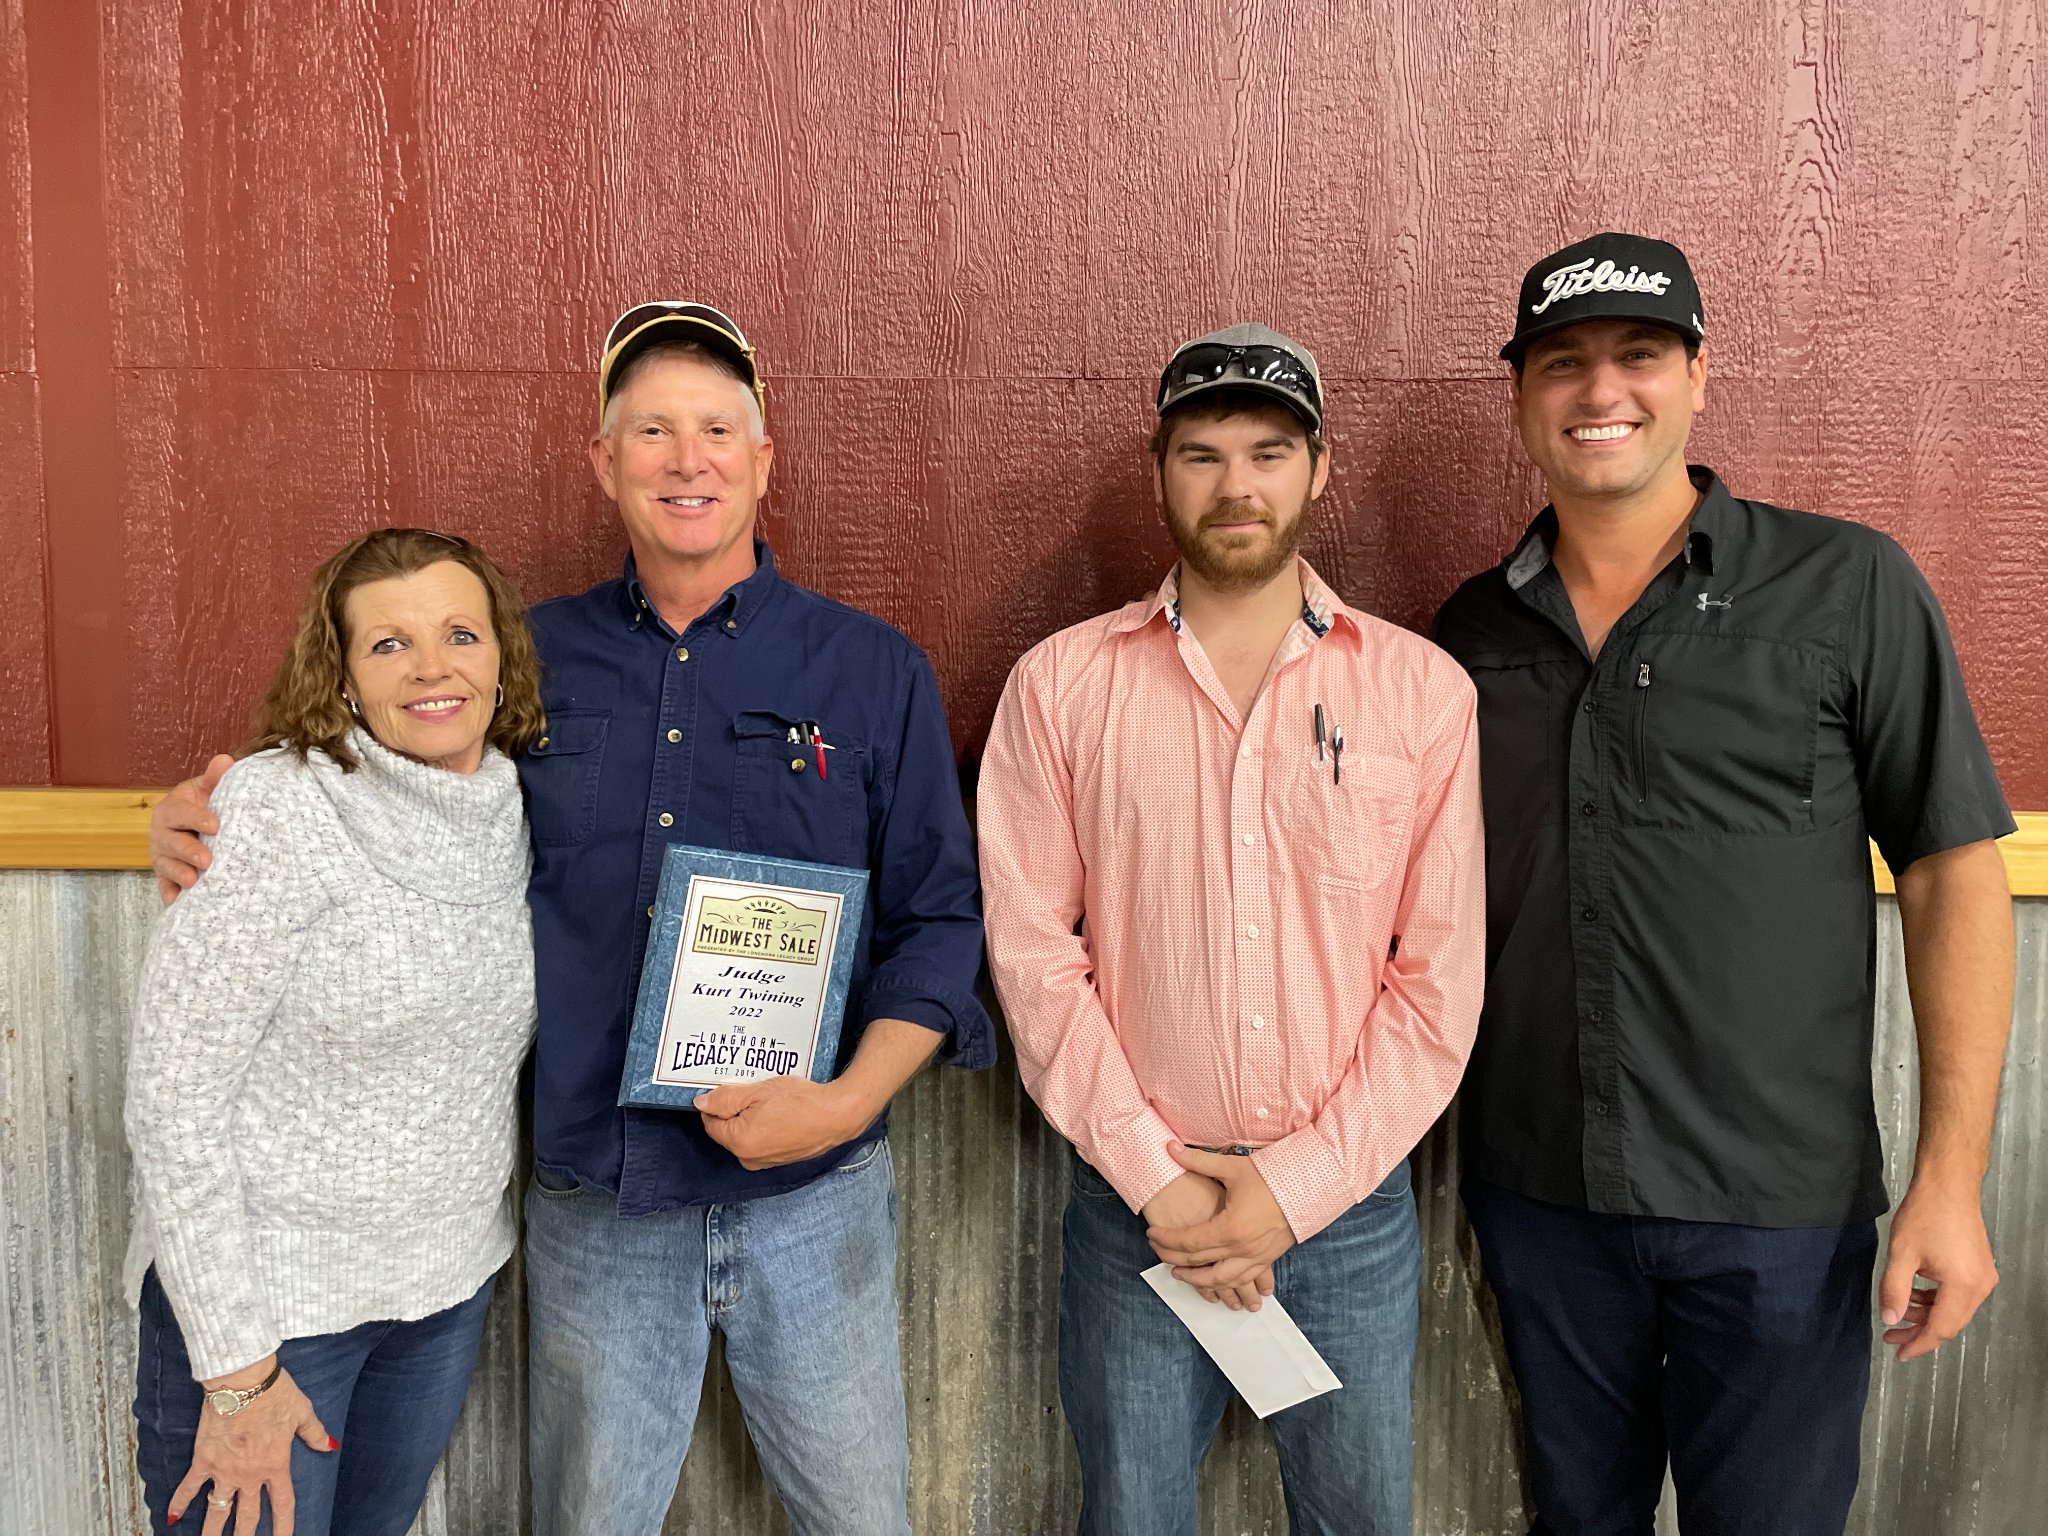 Sale Hosts Debbie Bowmen and Hired Hand customers Lane Craft, Craft Ranch with Futurity Judges Kurt Twining, Silver T Ranch; Dylan Pfizenmaier, Pleasant Hill Longhorns